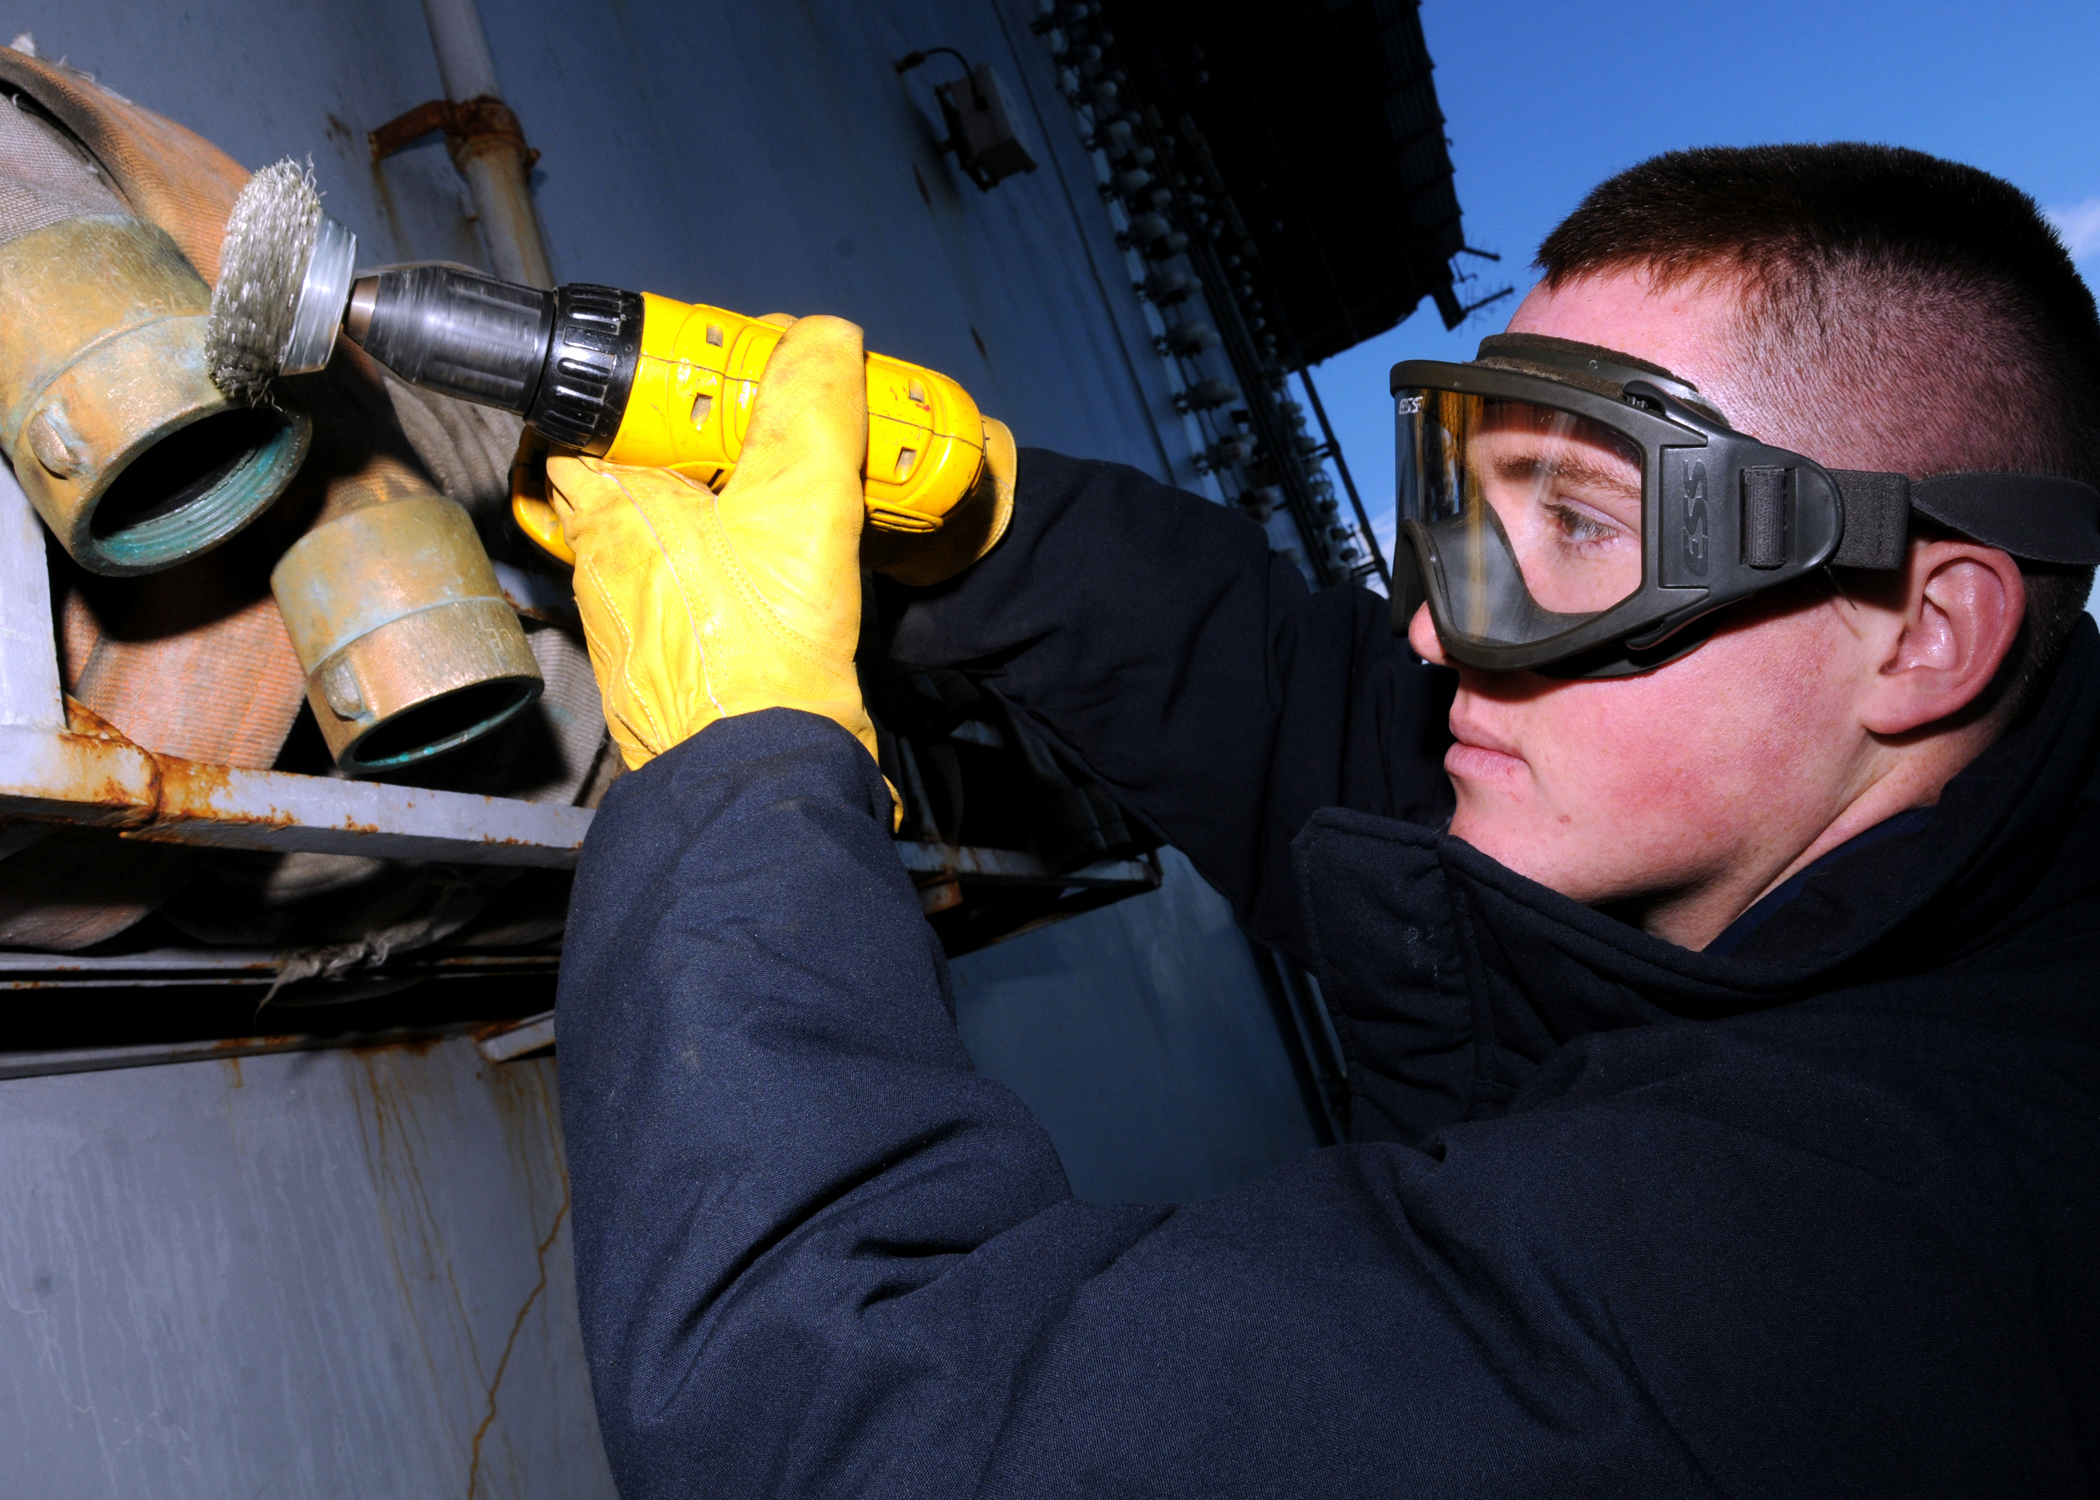 US Navy 081201-N-9898L-068 viation Boatswain's Mate Airman Mitchell Larson removes corrosion from a fire hose